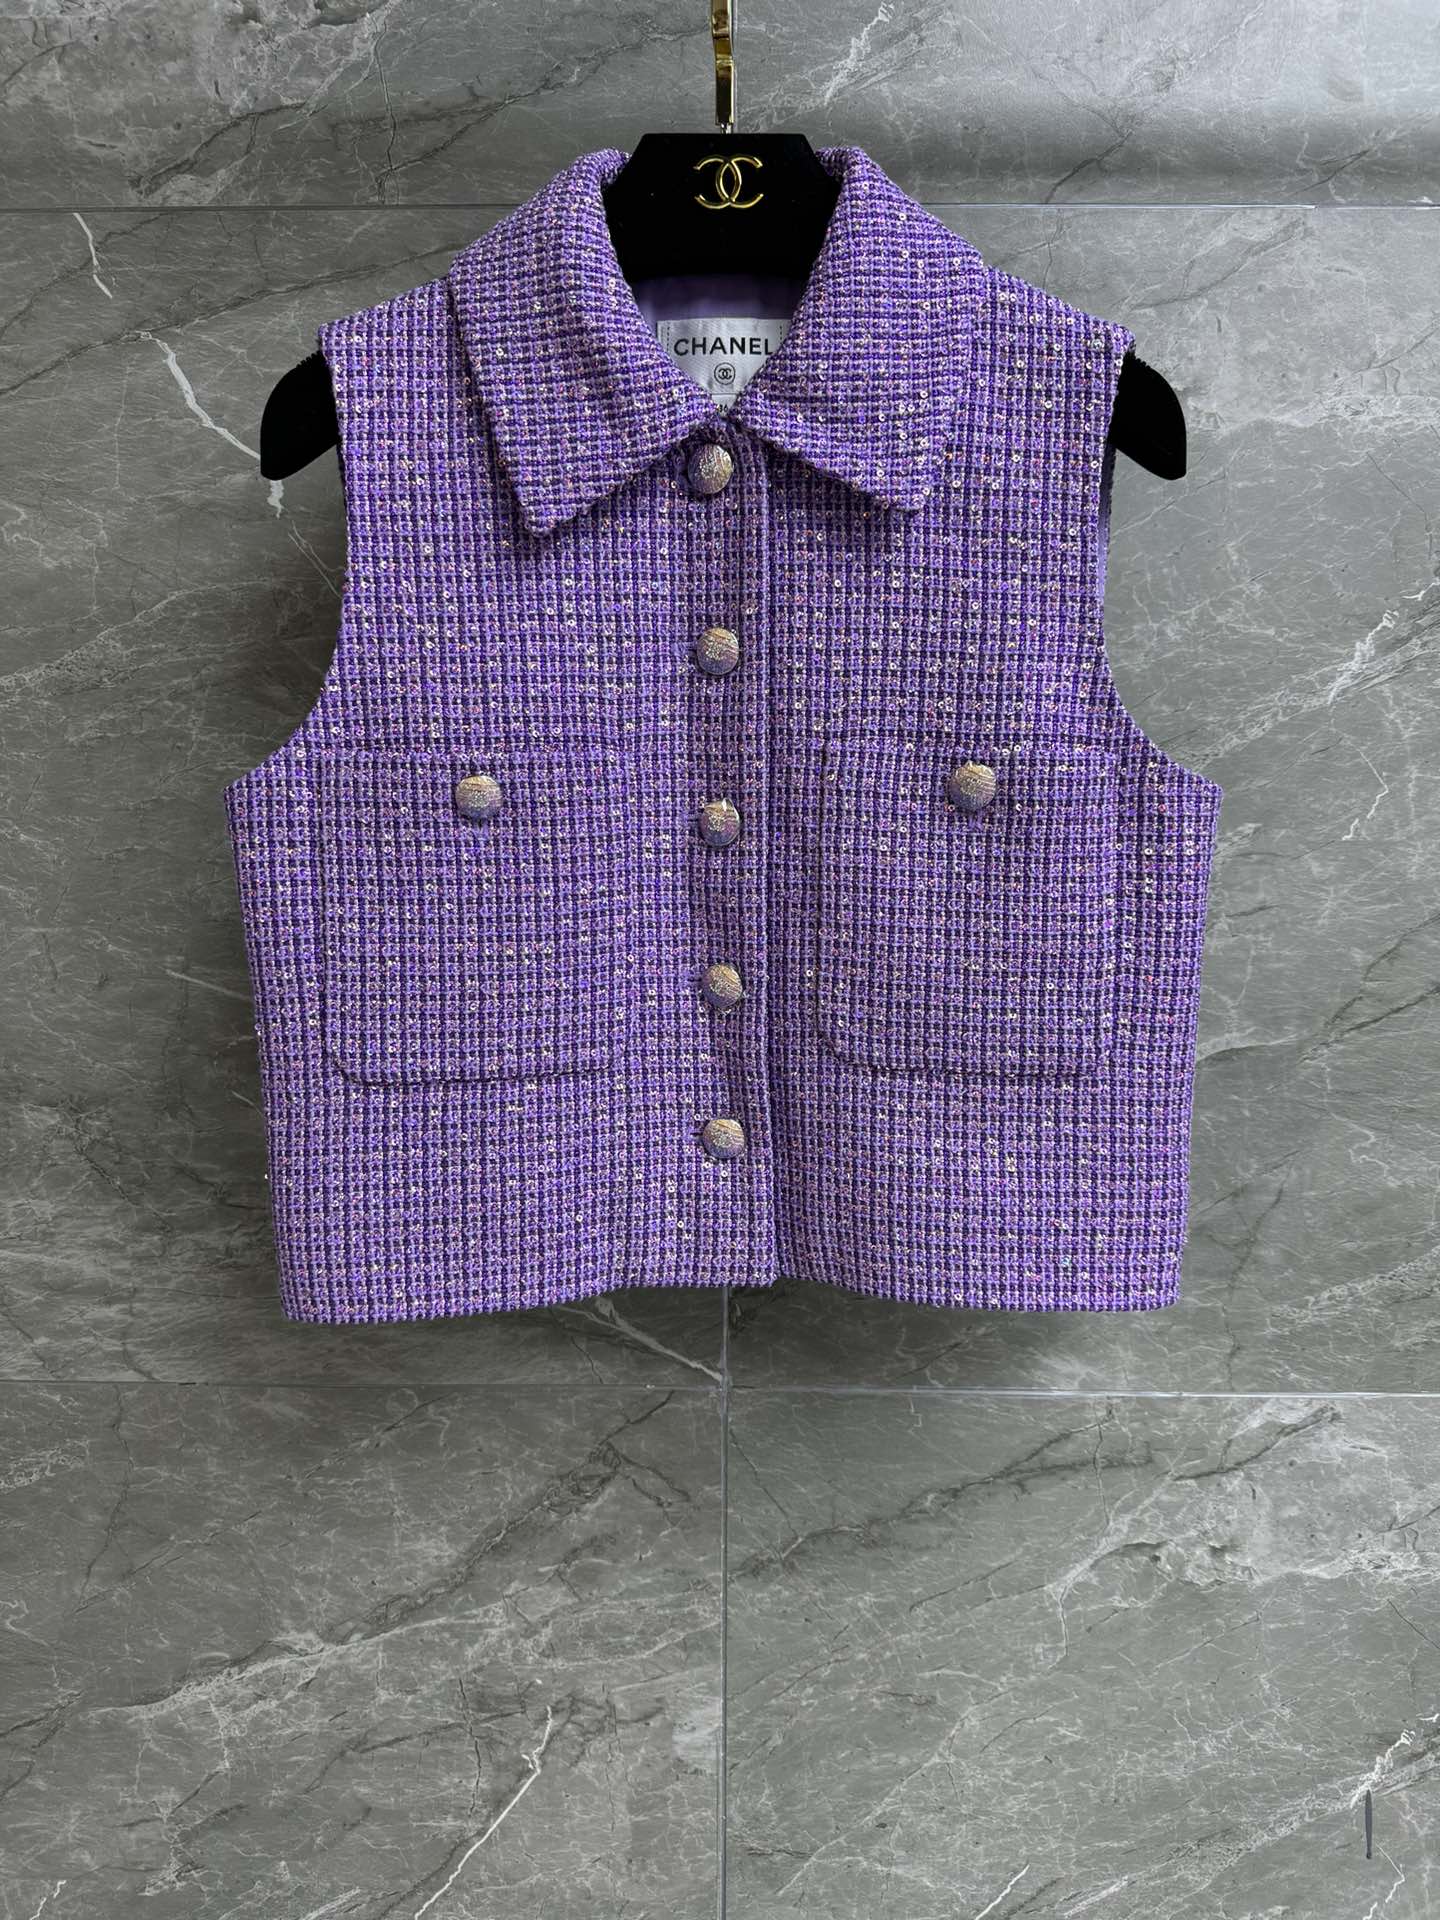 Chanel Clothing Waistcoats Buy High-Quality Fake
 Purple Set With Diamonds Silk Spring Collection SML535480